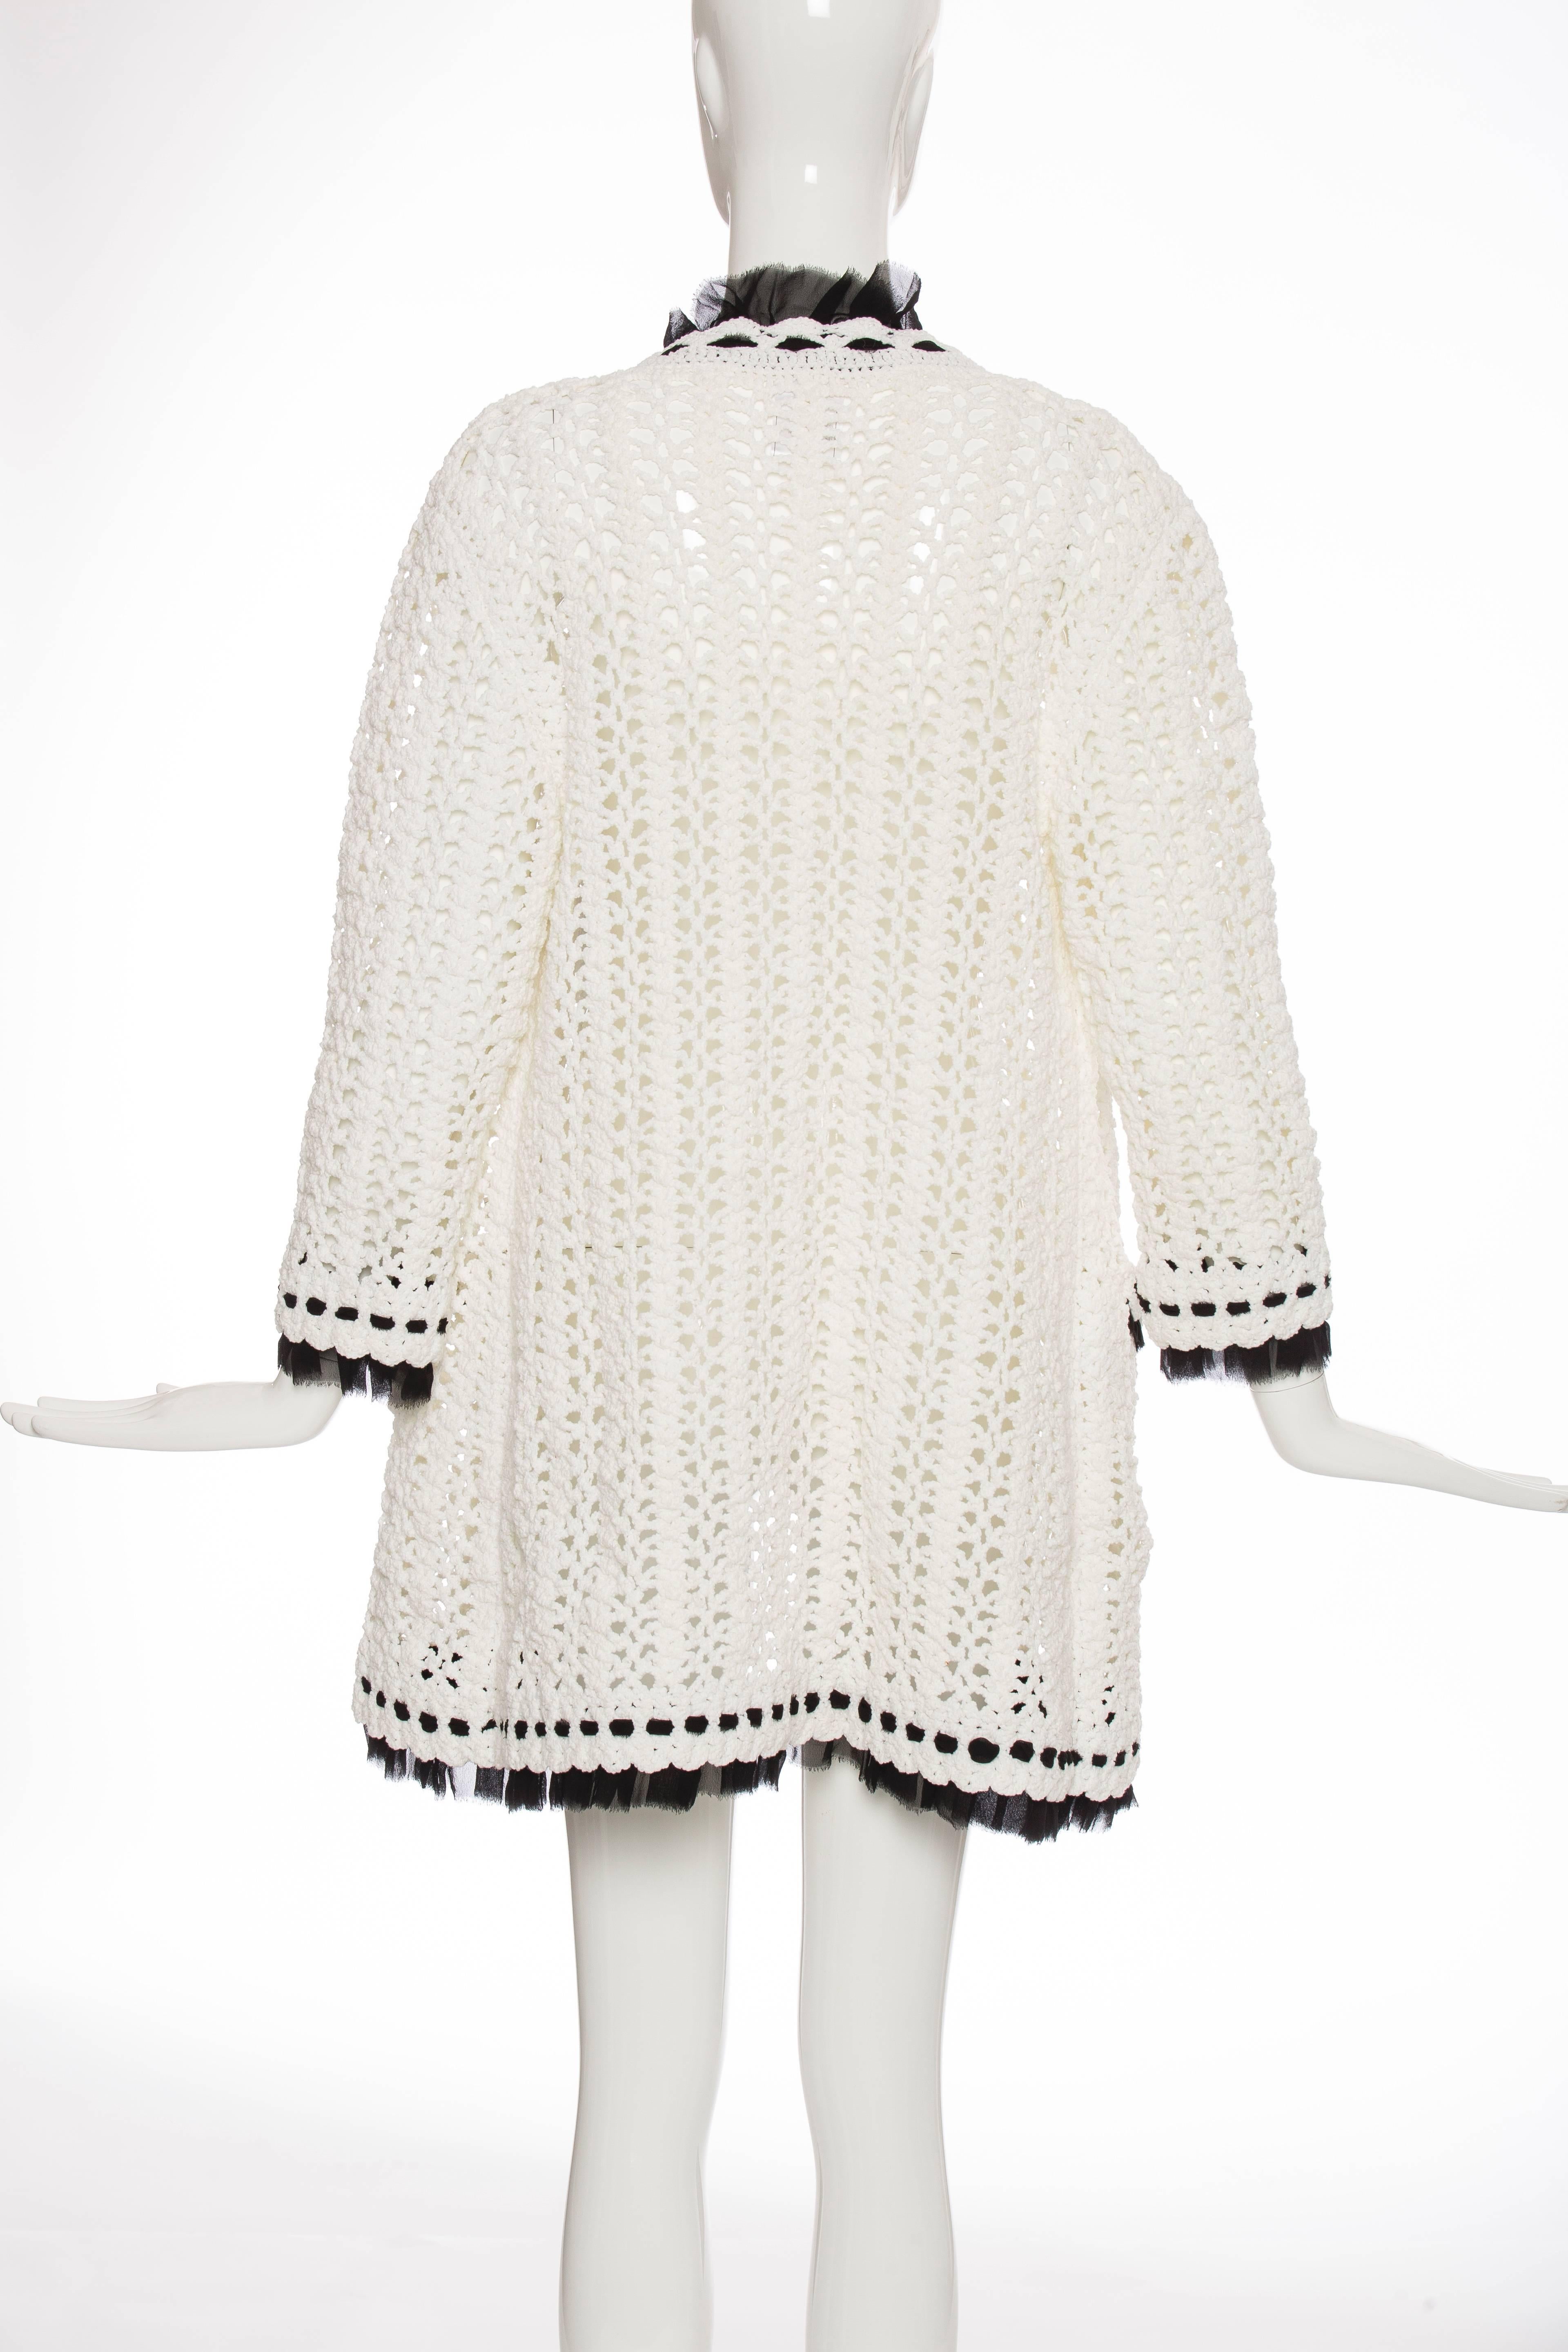 Chanel Ivory Crochet Knit Cardigan With Black Silk Chiffon Trim, Spring 2005 In Excellent Condition For Sale In Cincinnati, OH